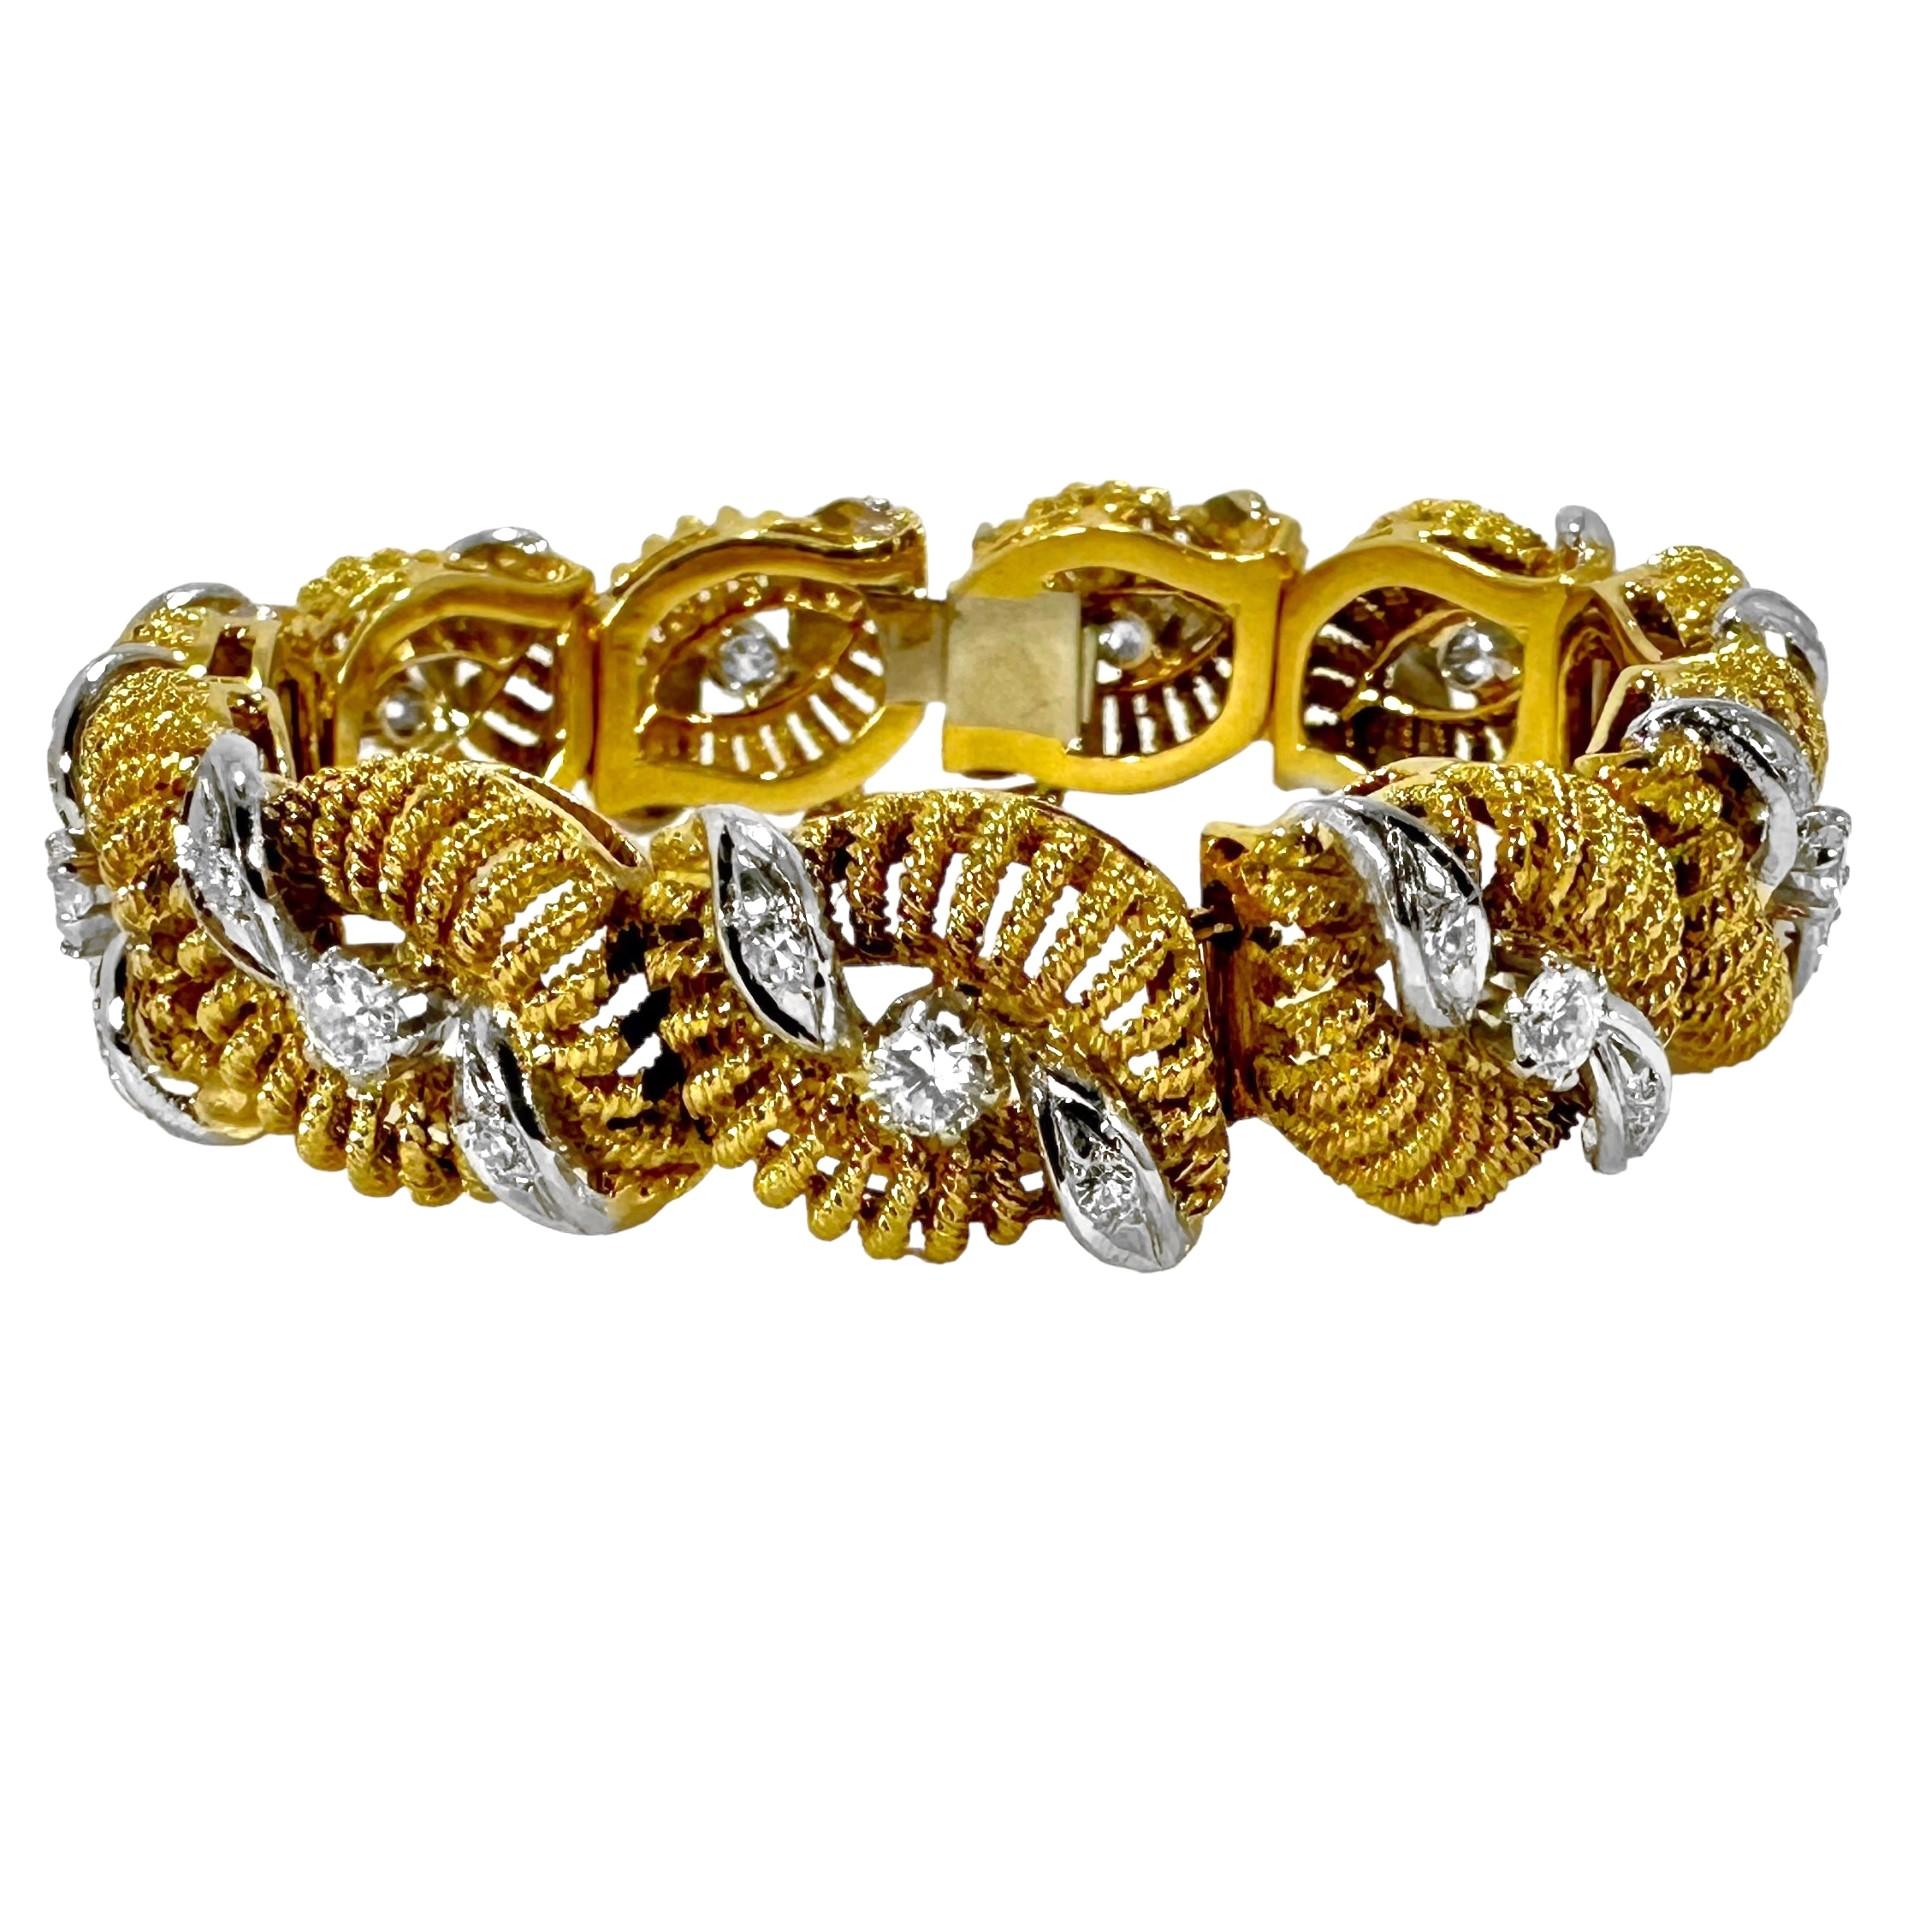 This lovely and predominantly hand crafted 18k yellow gold bracelet is clearly the product of a very sophisticated craftsman. Each link repeats organic motif hand twisted wire bombe panels affixed to casted bases, and all are accented by center